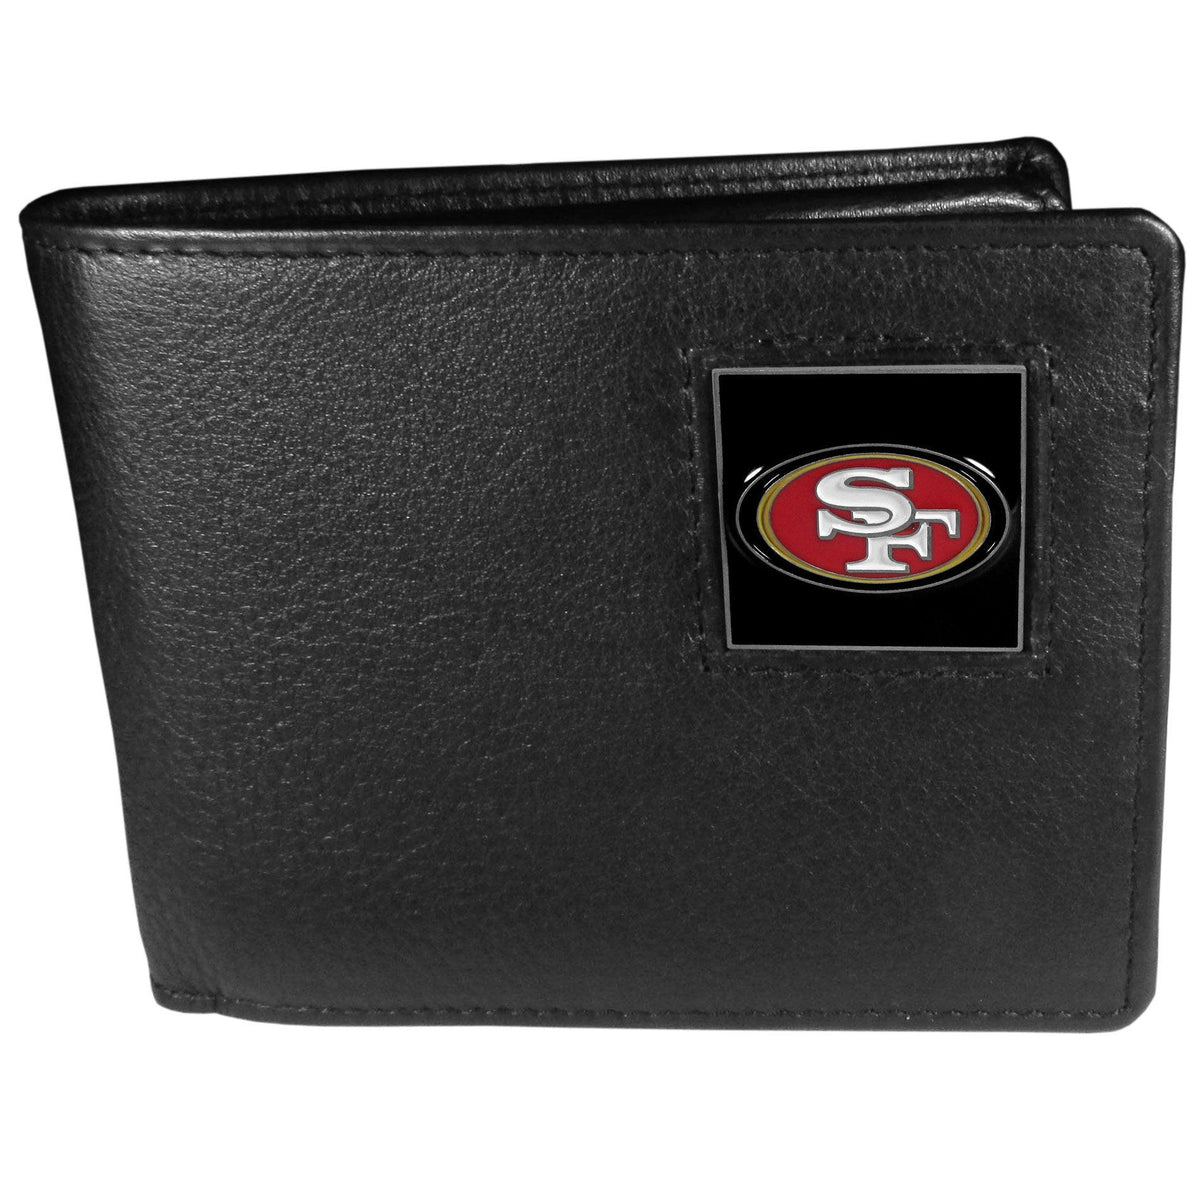 San Francisco 49ers Leather Bi-fold Wallet Packaged in Gift Box - Flyclothing LLC